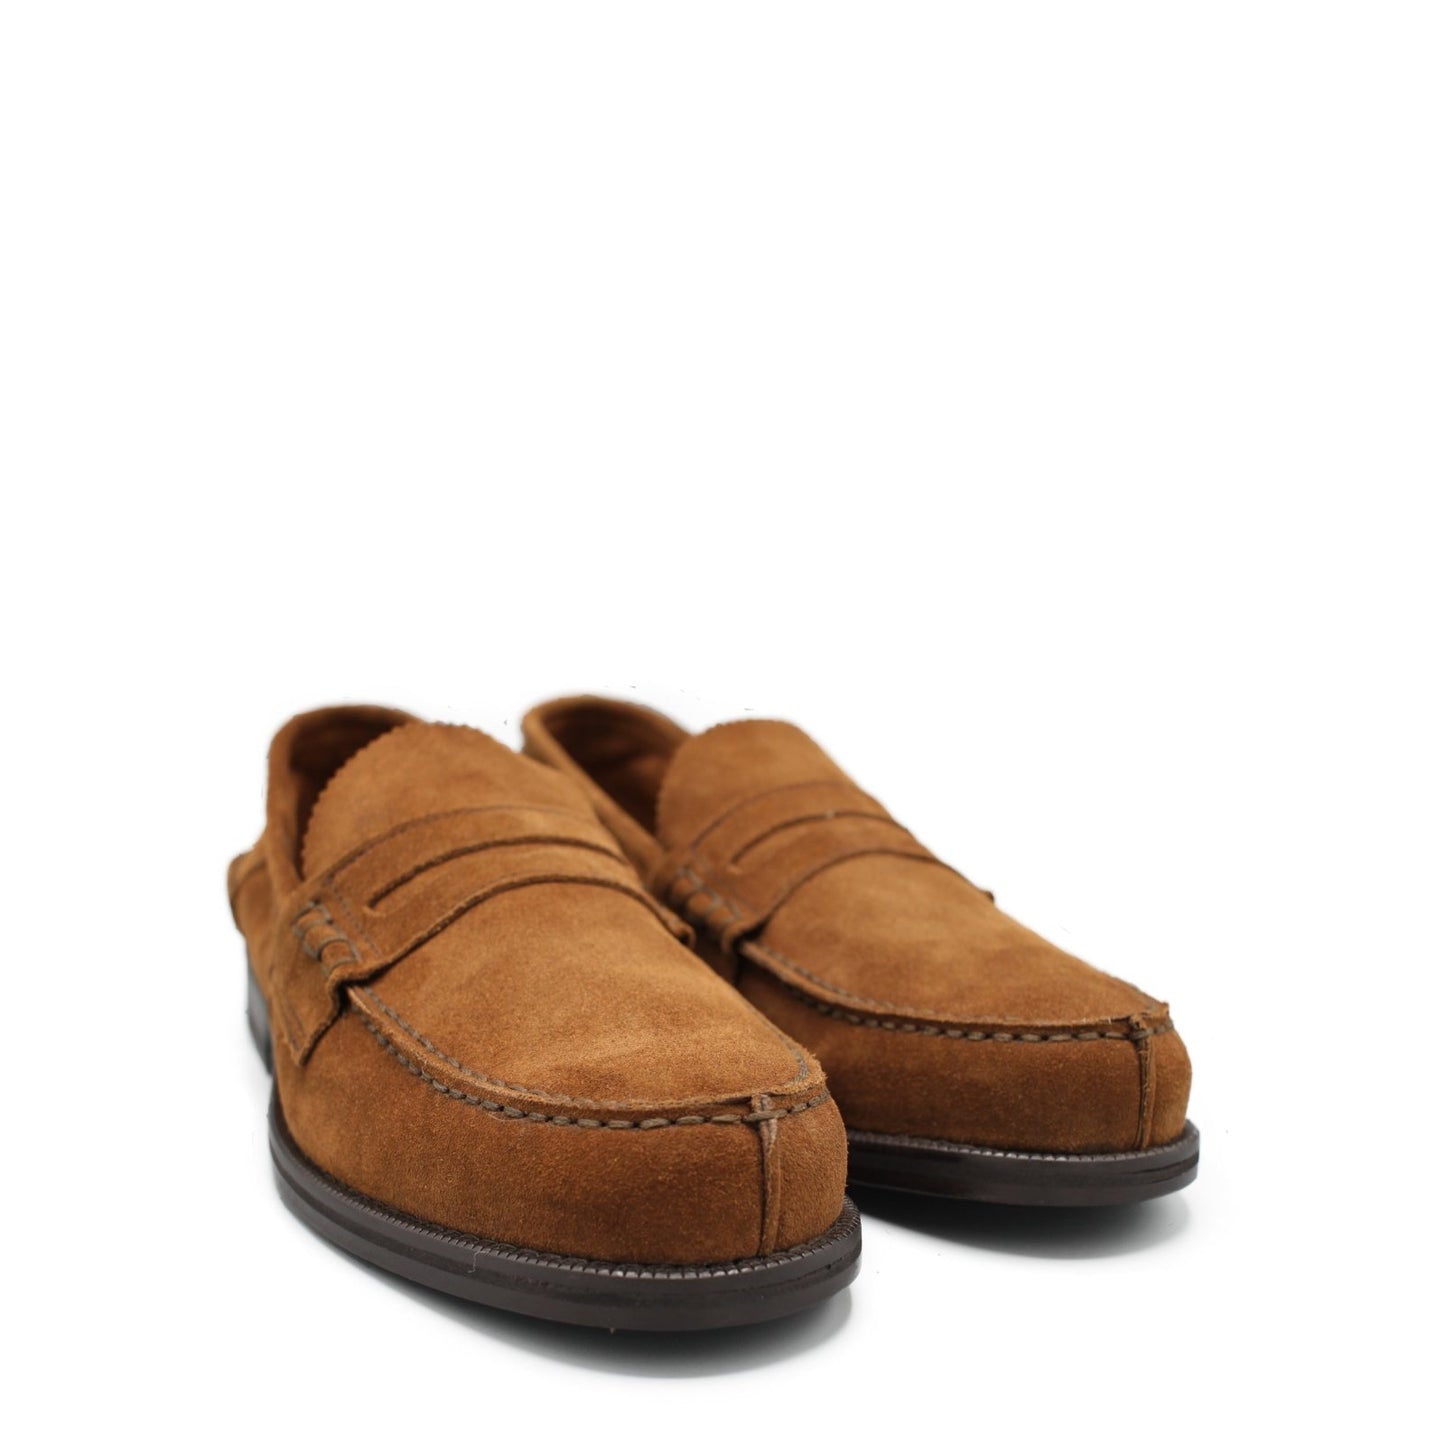 PENNY LOAFER TOBACCO SUEDE - Saxone of Scotland